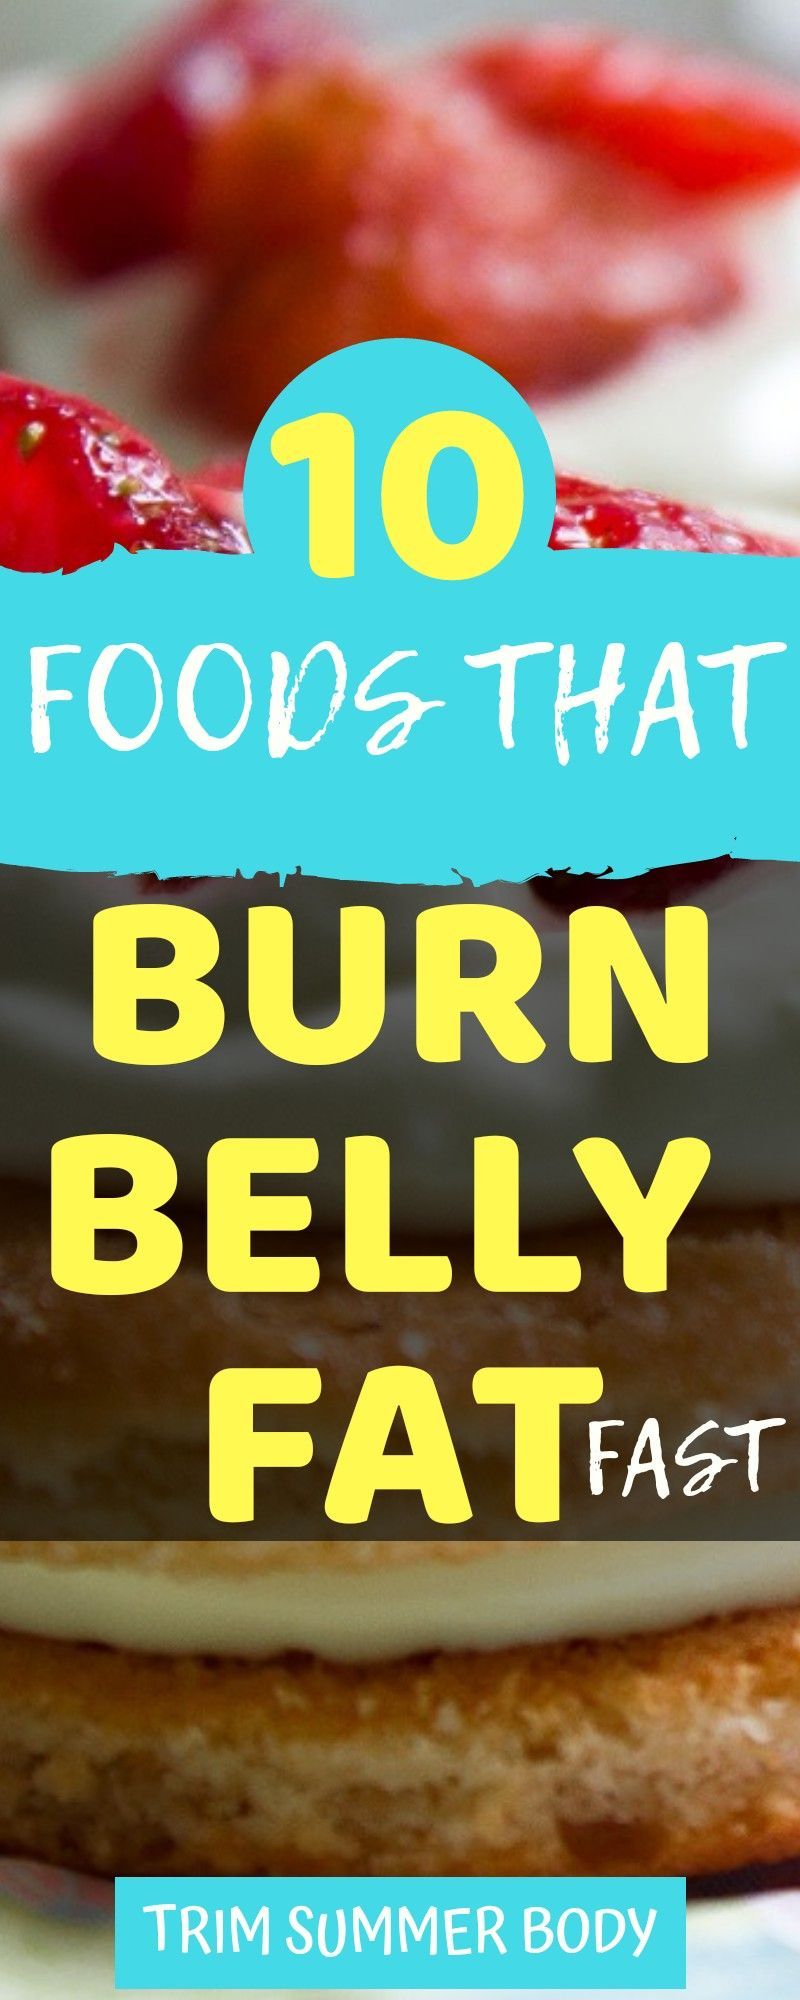 Foods that burn belly fat fast -   14 flat belly for teens
 ideas